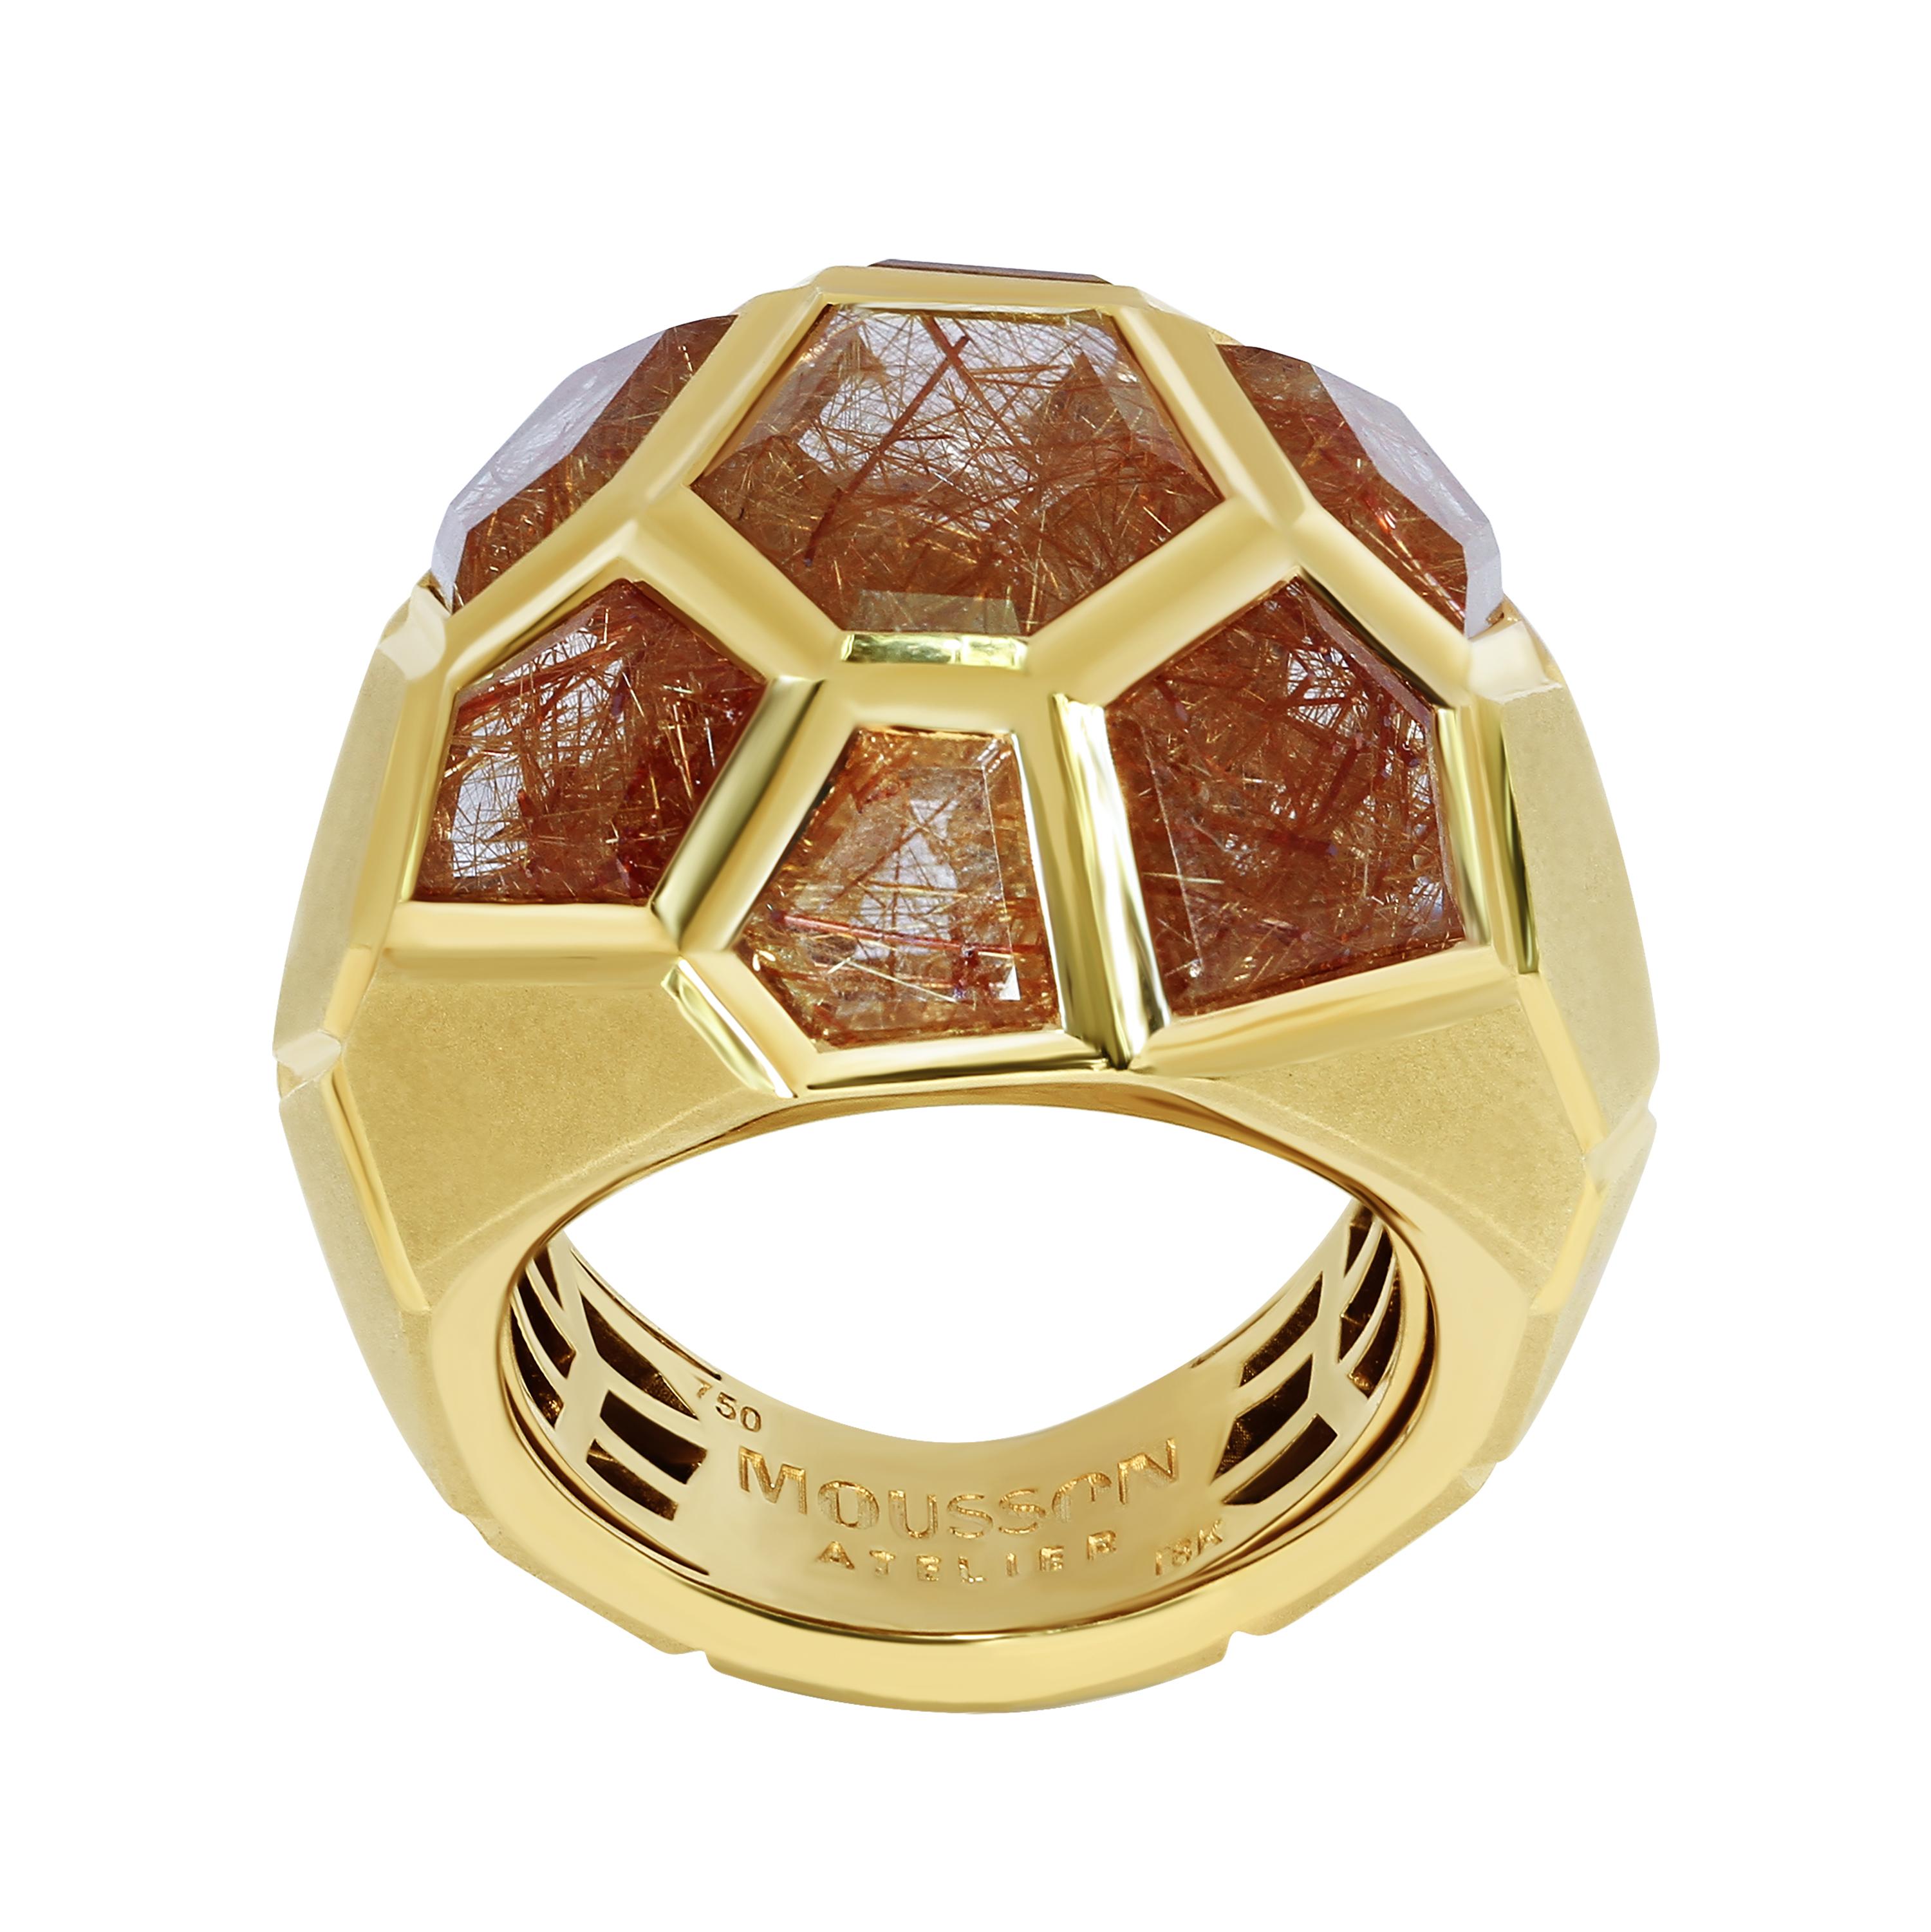 Rutilated Quartz 11.26 Carat 18 Karat Yellow Gold Geometry Ring
We present to your attention our New Collection 